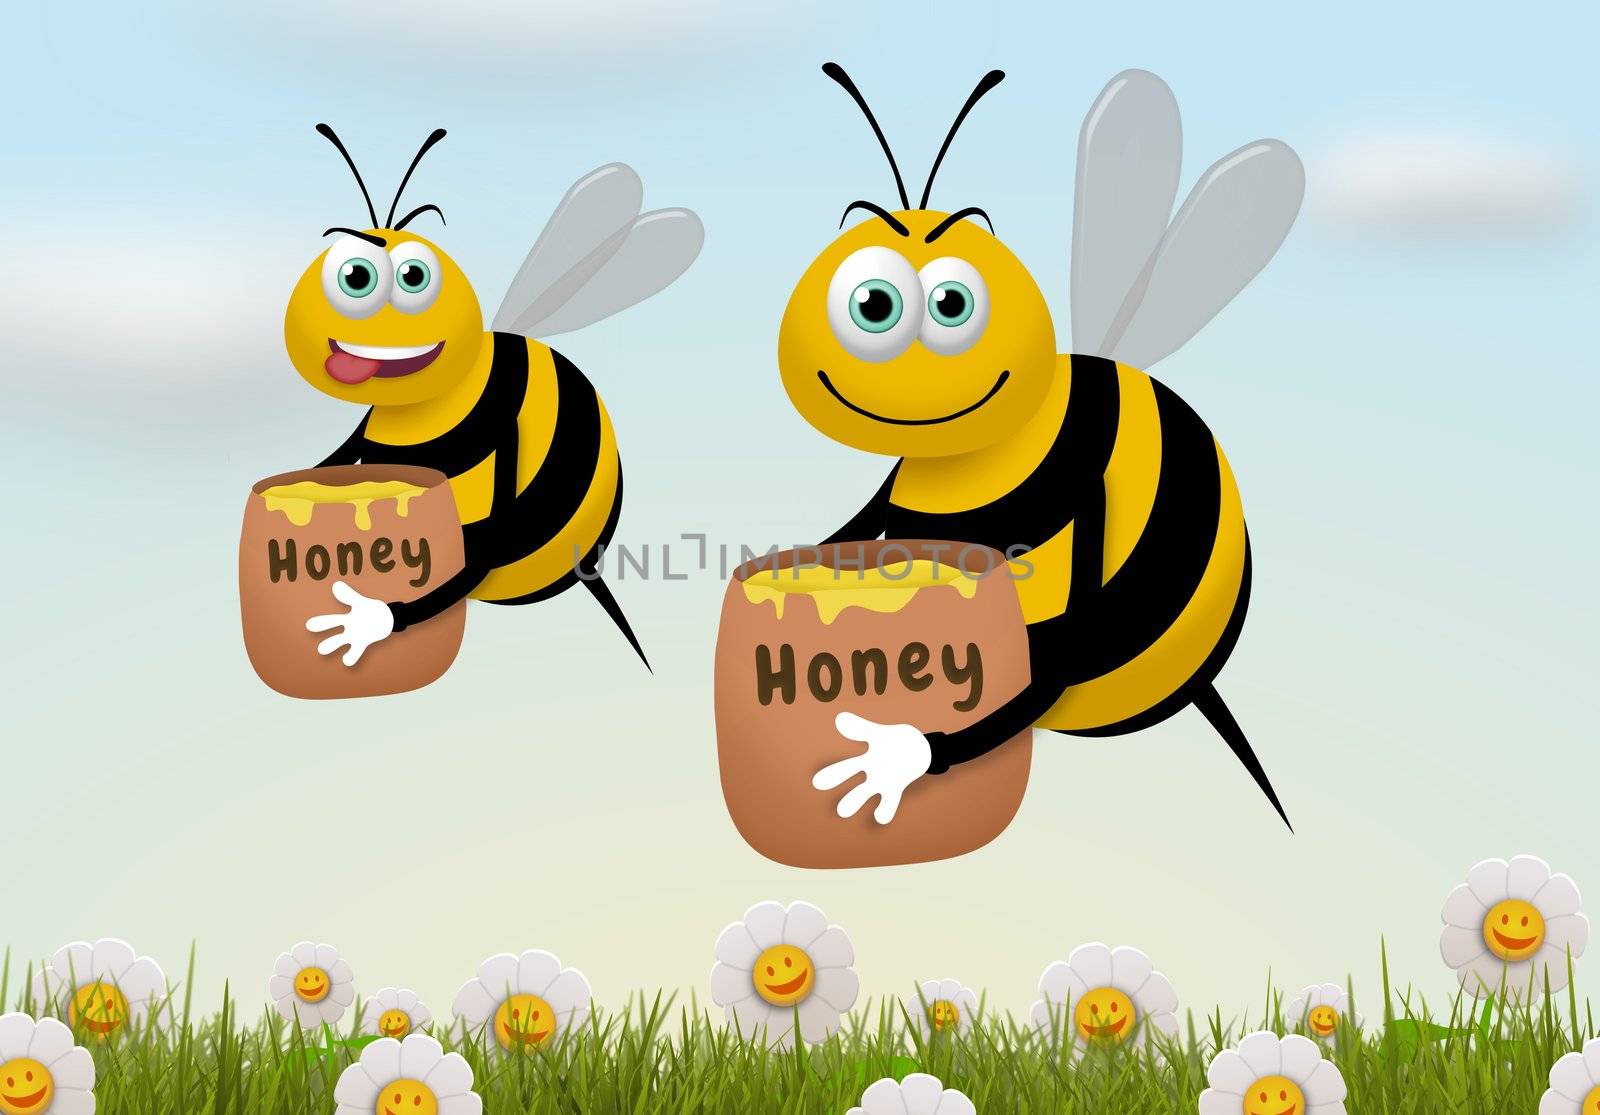 Illustration of two bees carrying honey pots while flying over a field of flowers